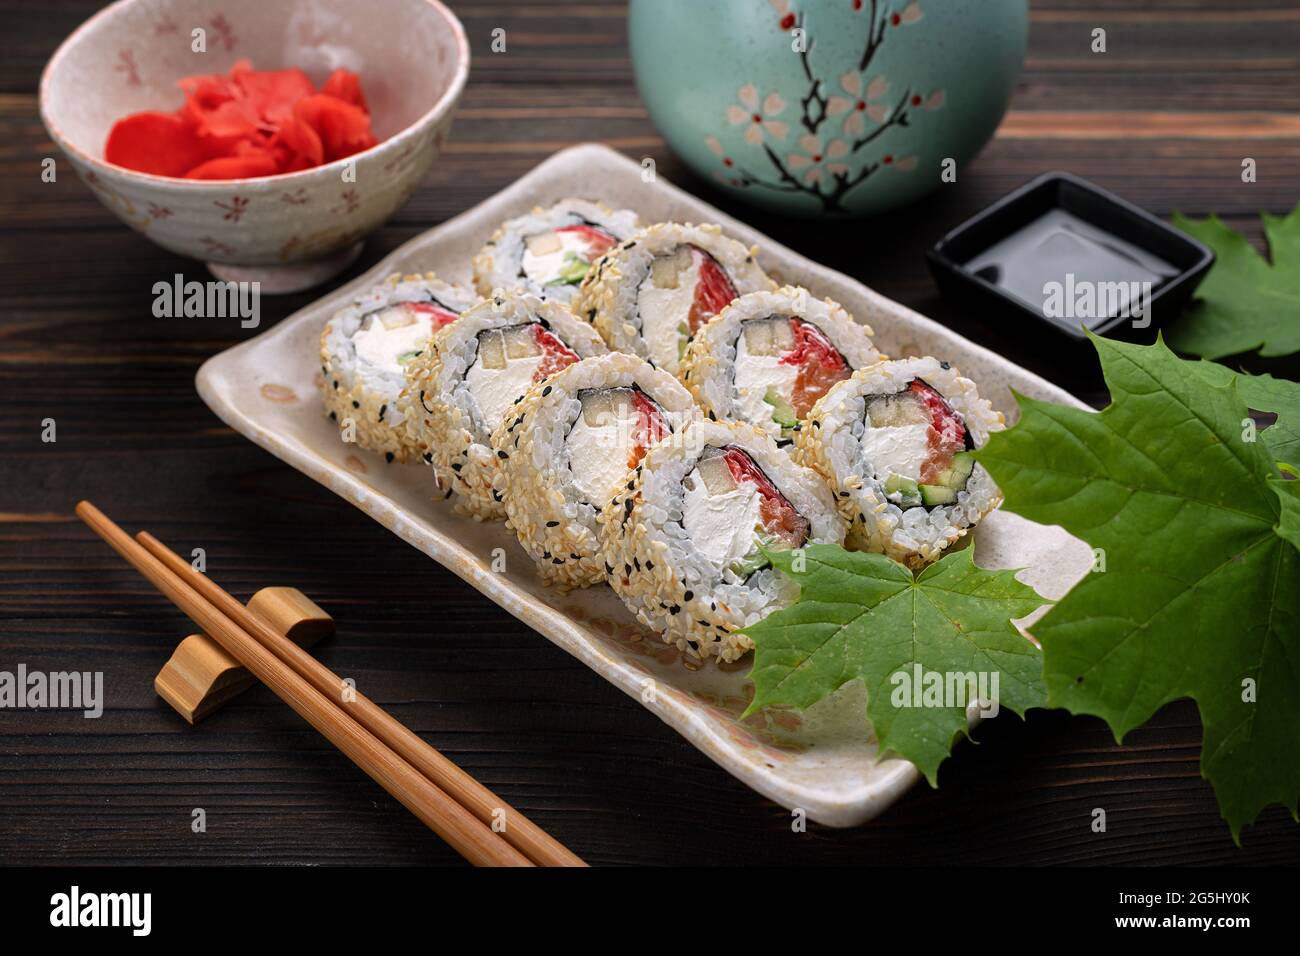 Set of sushi rolls with cream cheese, rice and salmon on a board decorated with ginger on a dark wooden background. Japanese cuisine. Food photo Stock Photo